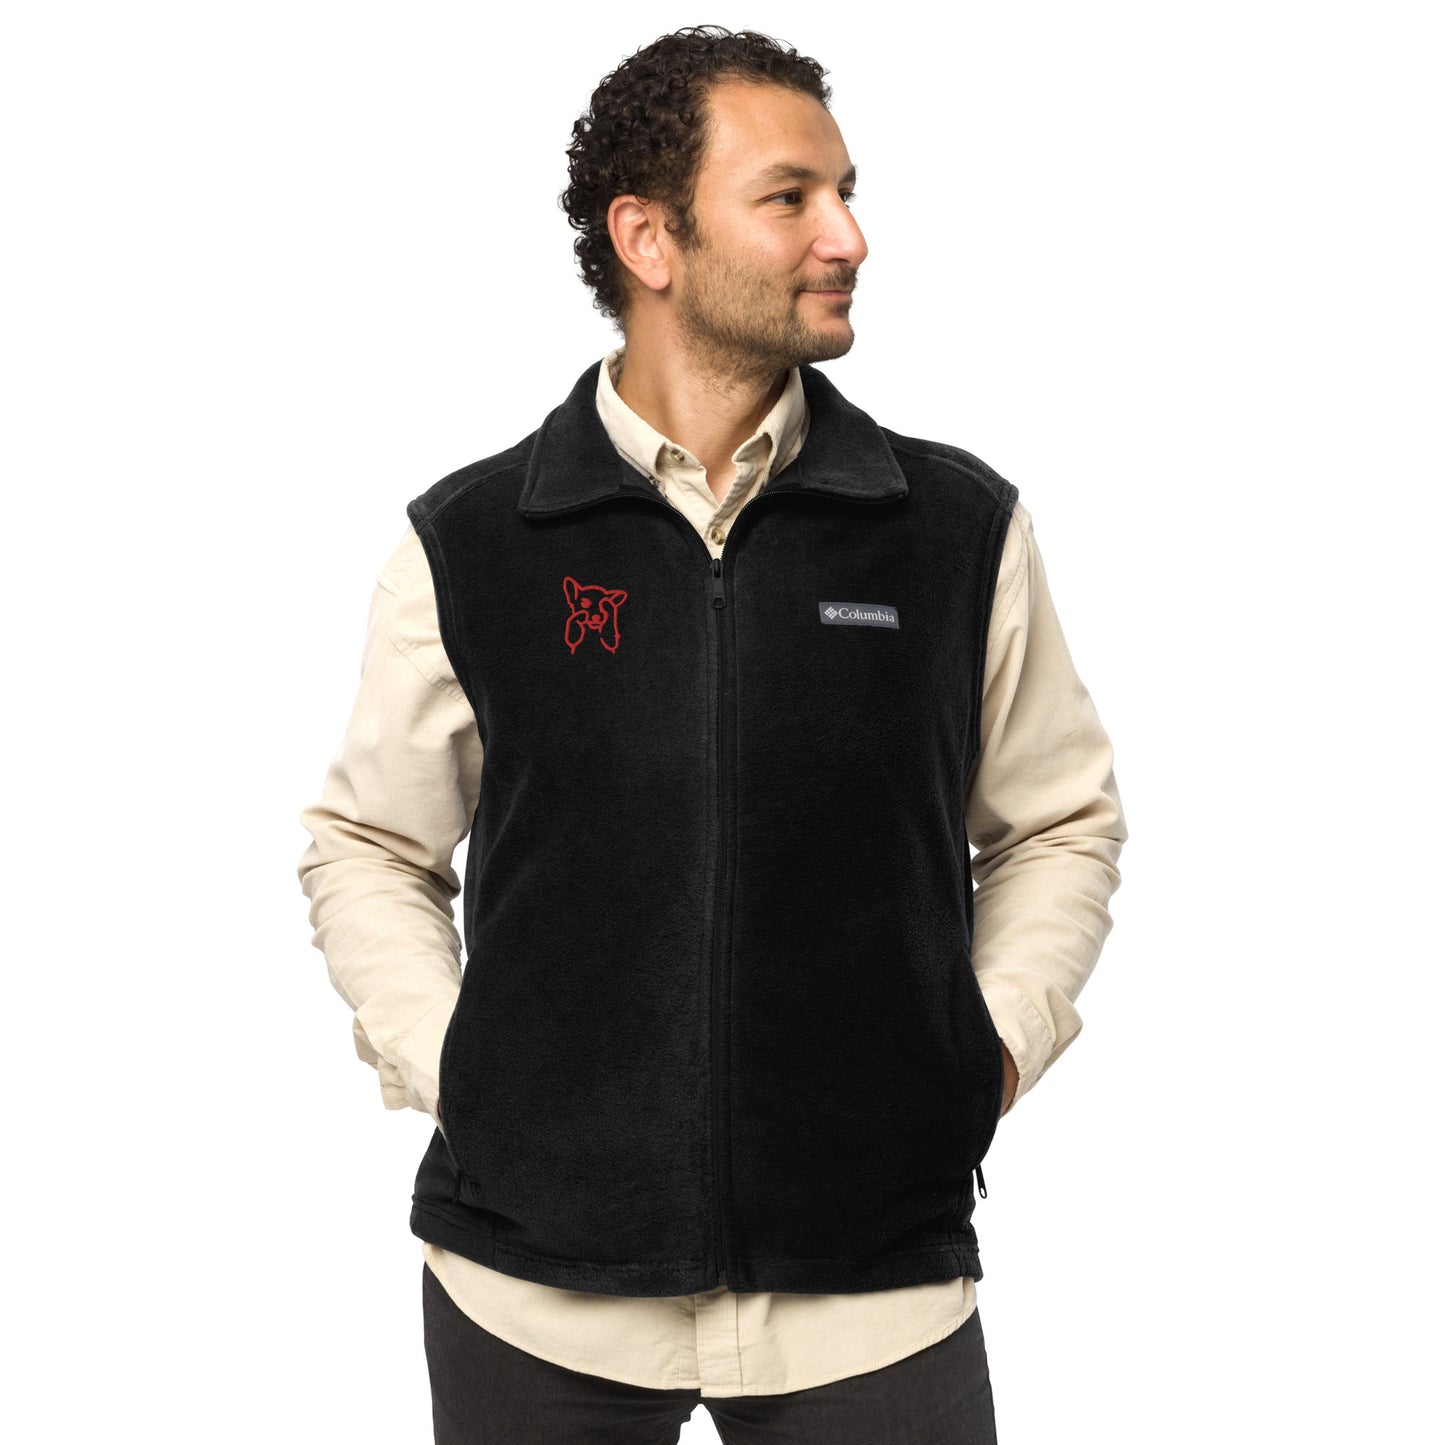 Men’s Columbia fleece vest , flat embroidery, red color cute dog sketch